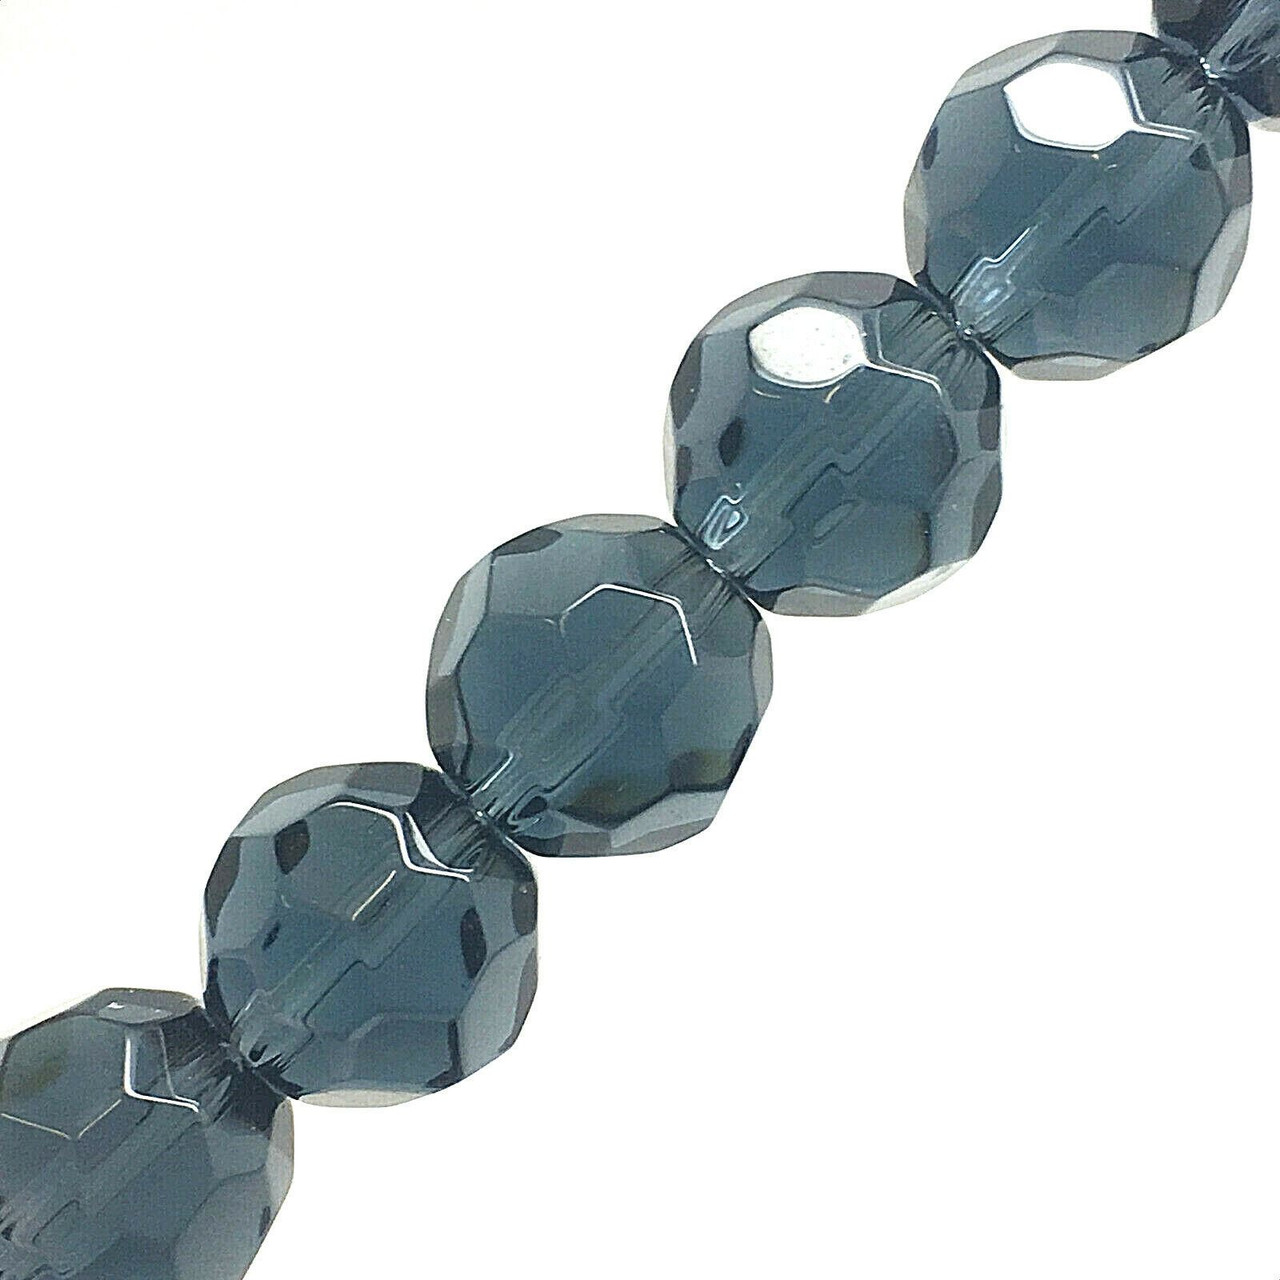 Strand of faceted round glass beads - approx 8mm, Grey, approx 40 beads, 12in